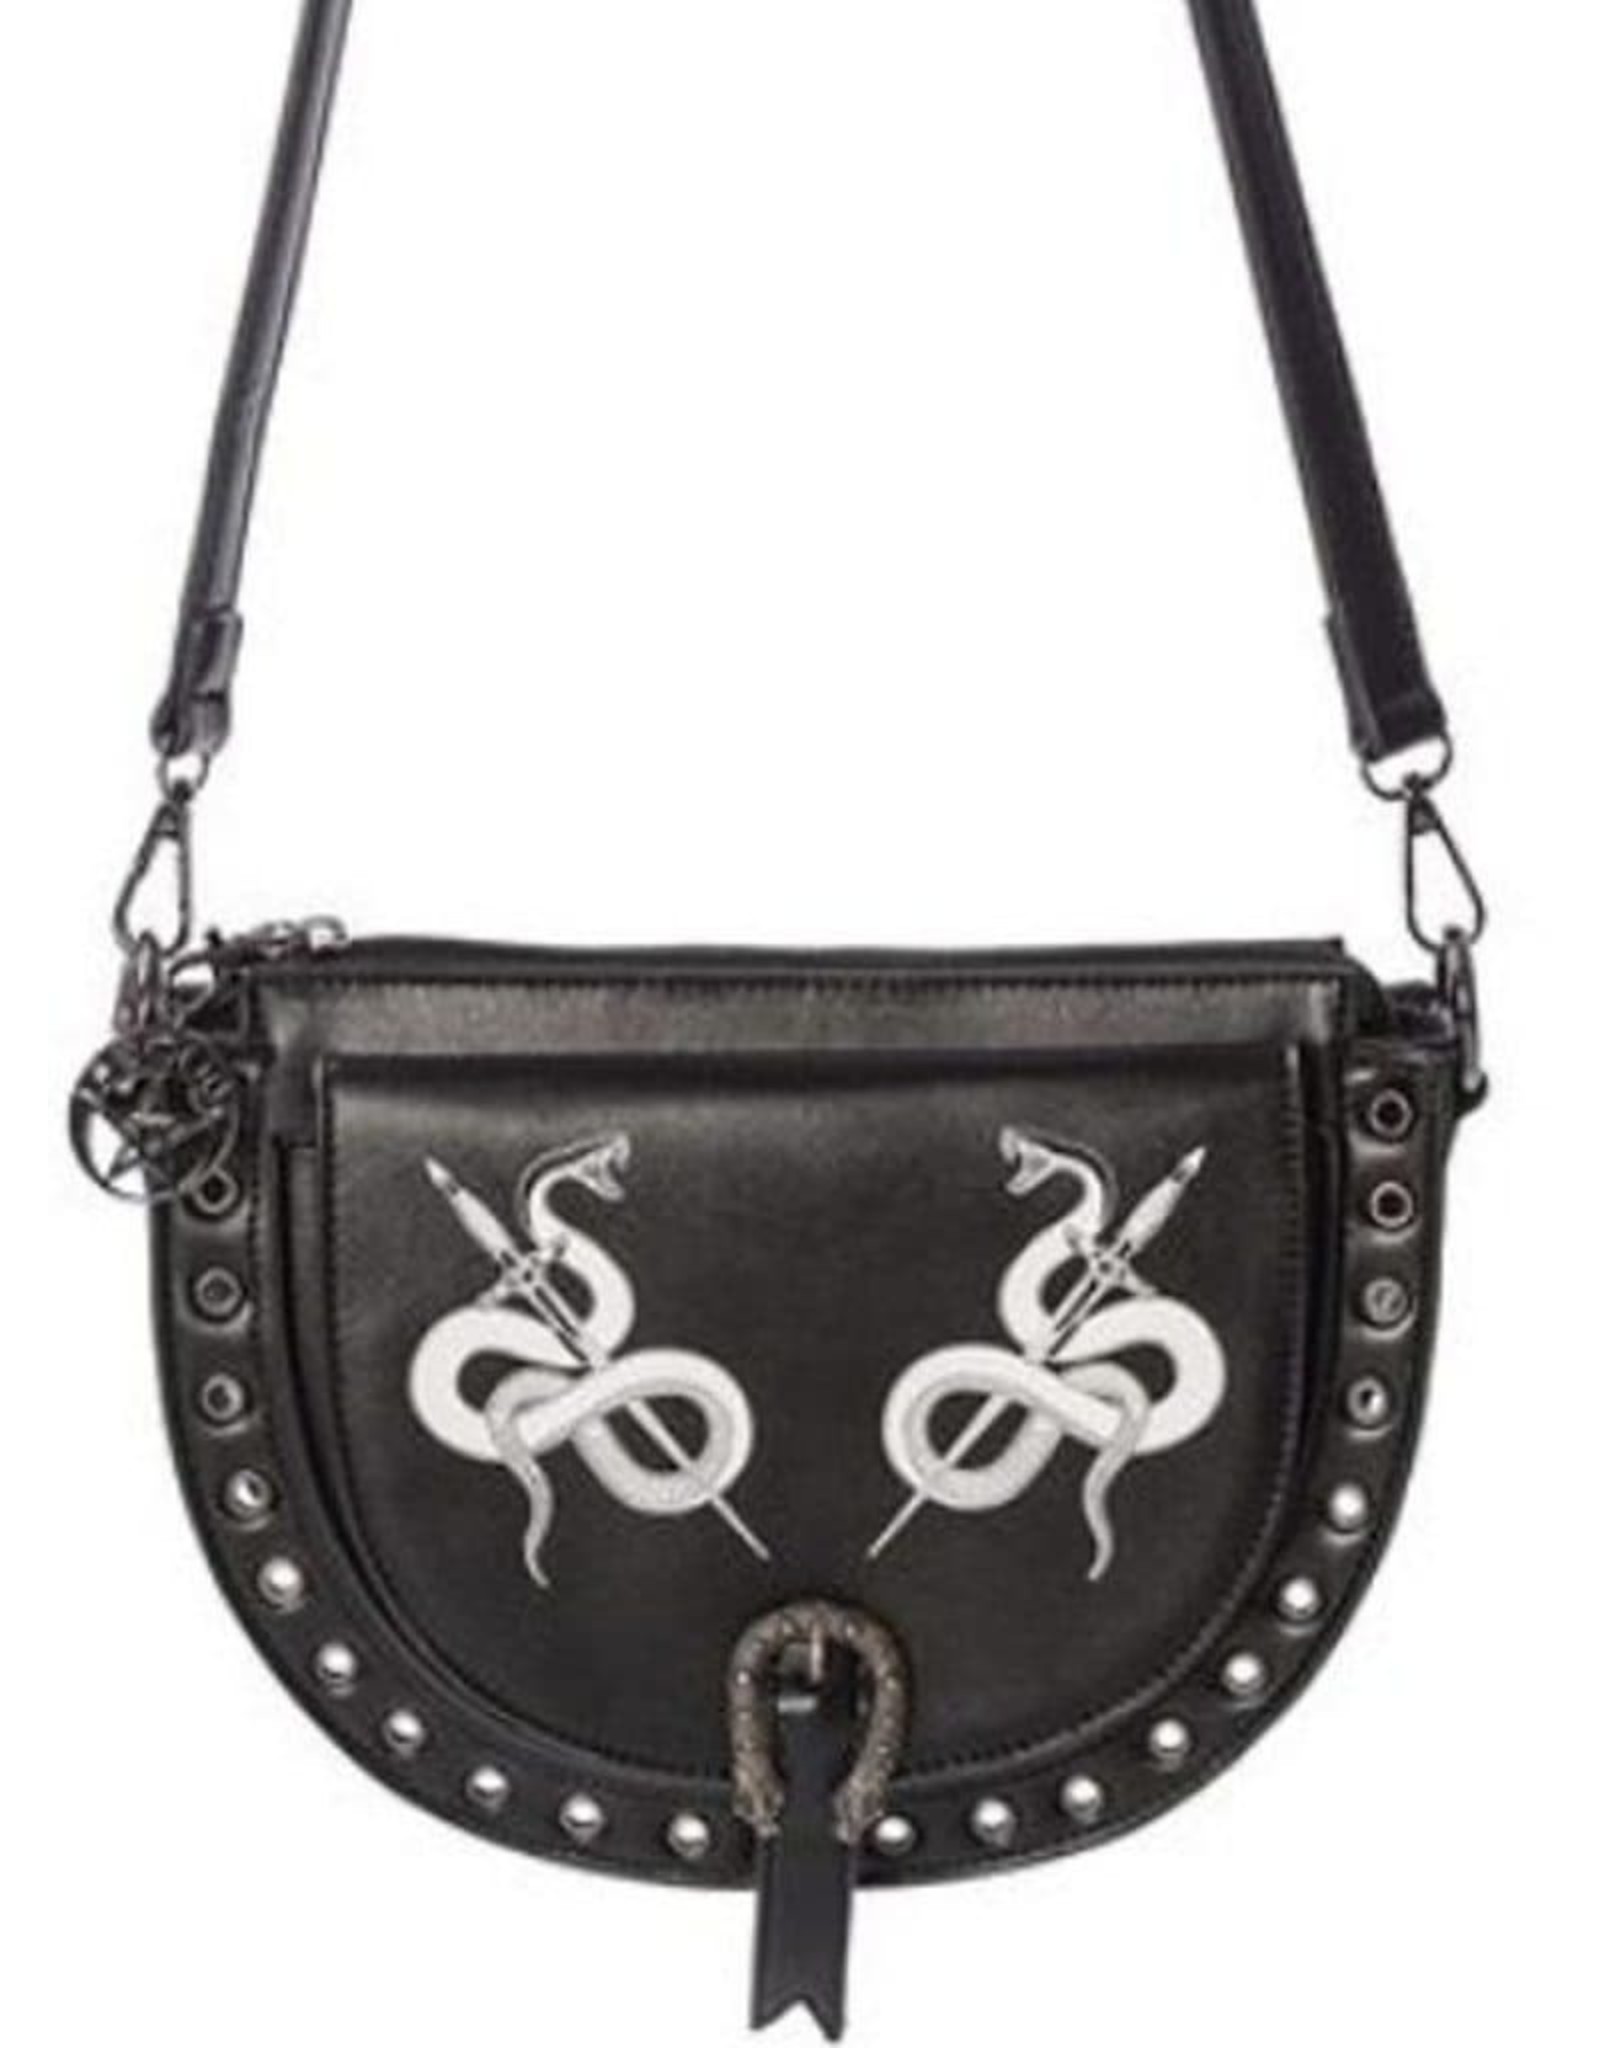 Gothic Gothic bags Steampunk bags - Banned Gothic Shoulder bag